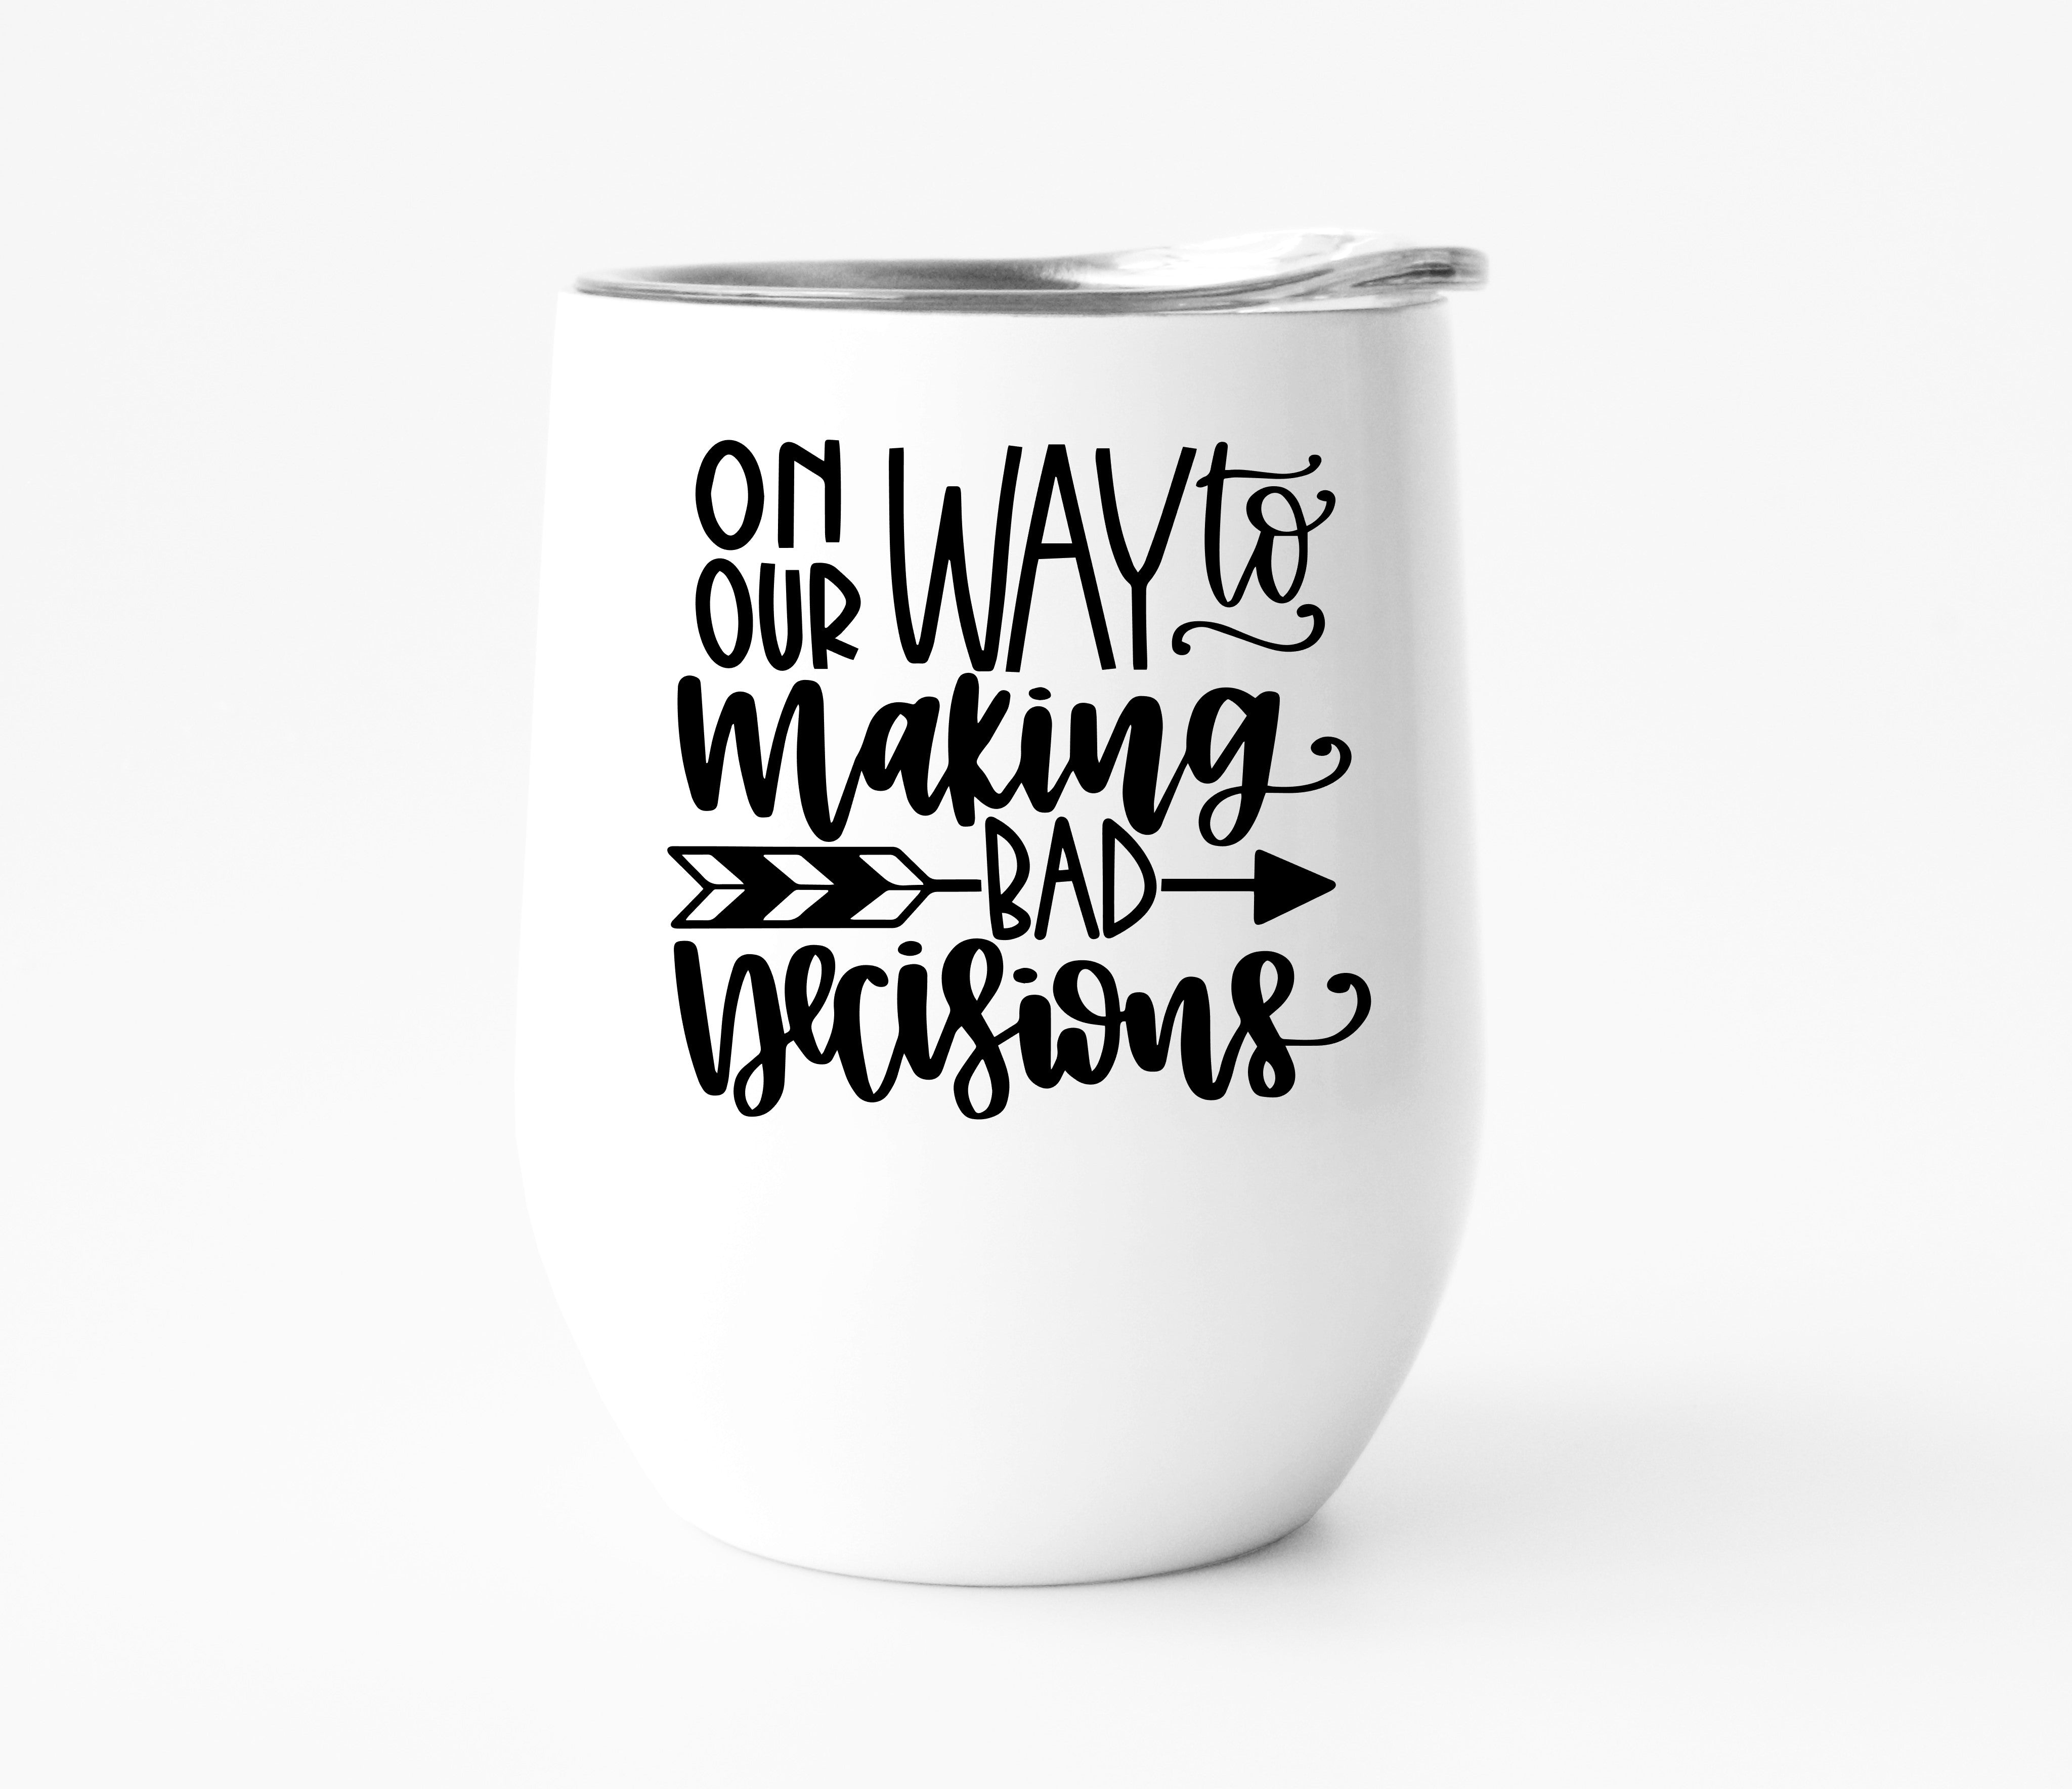 On Our Way to Making Bad Decisions Wine Tumbler